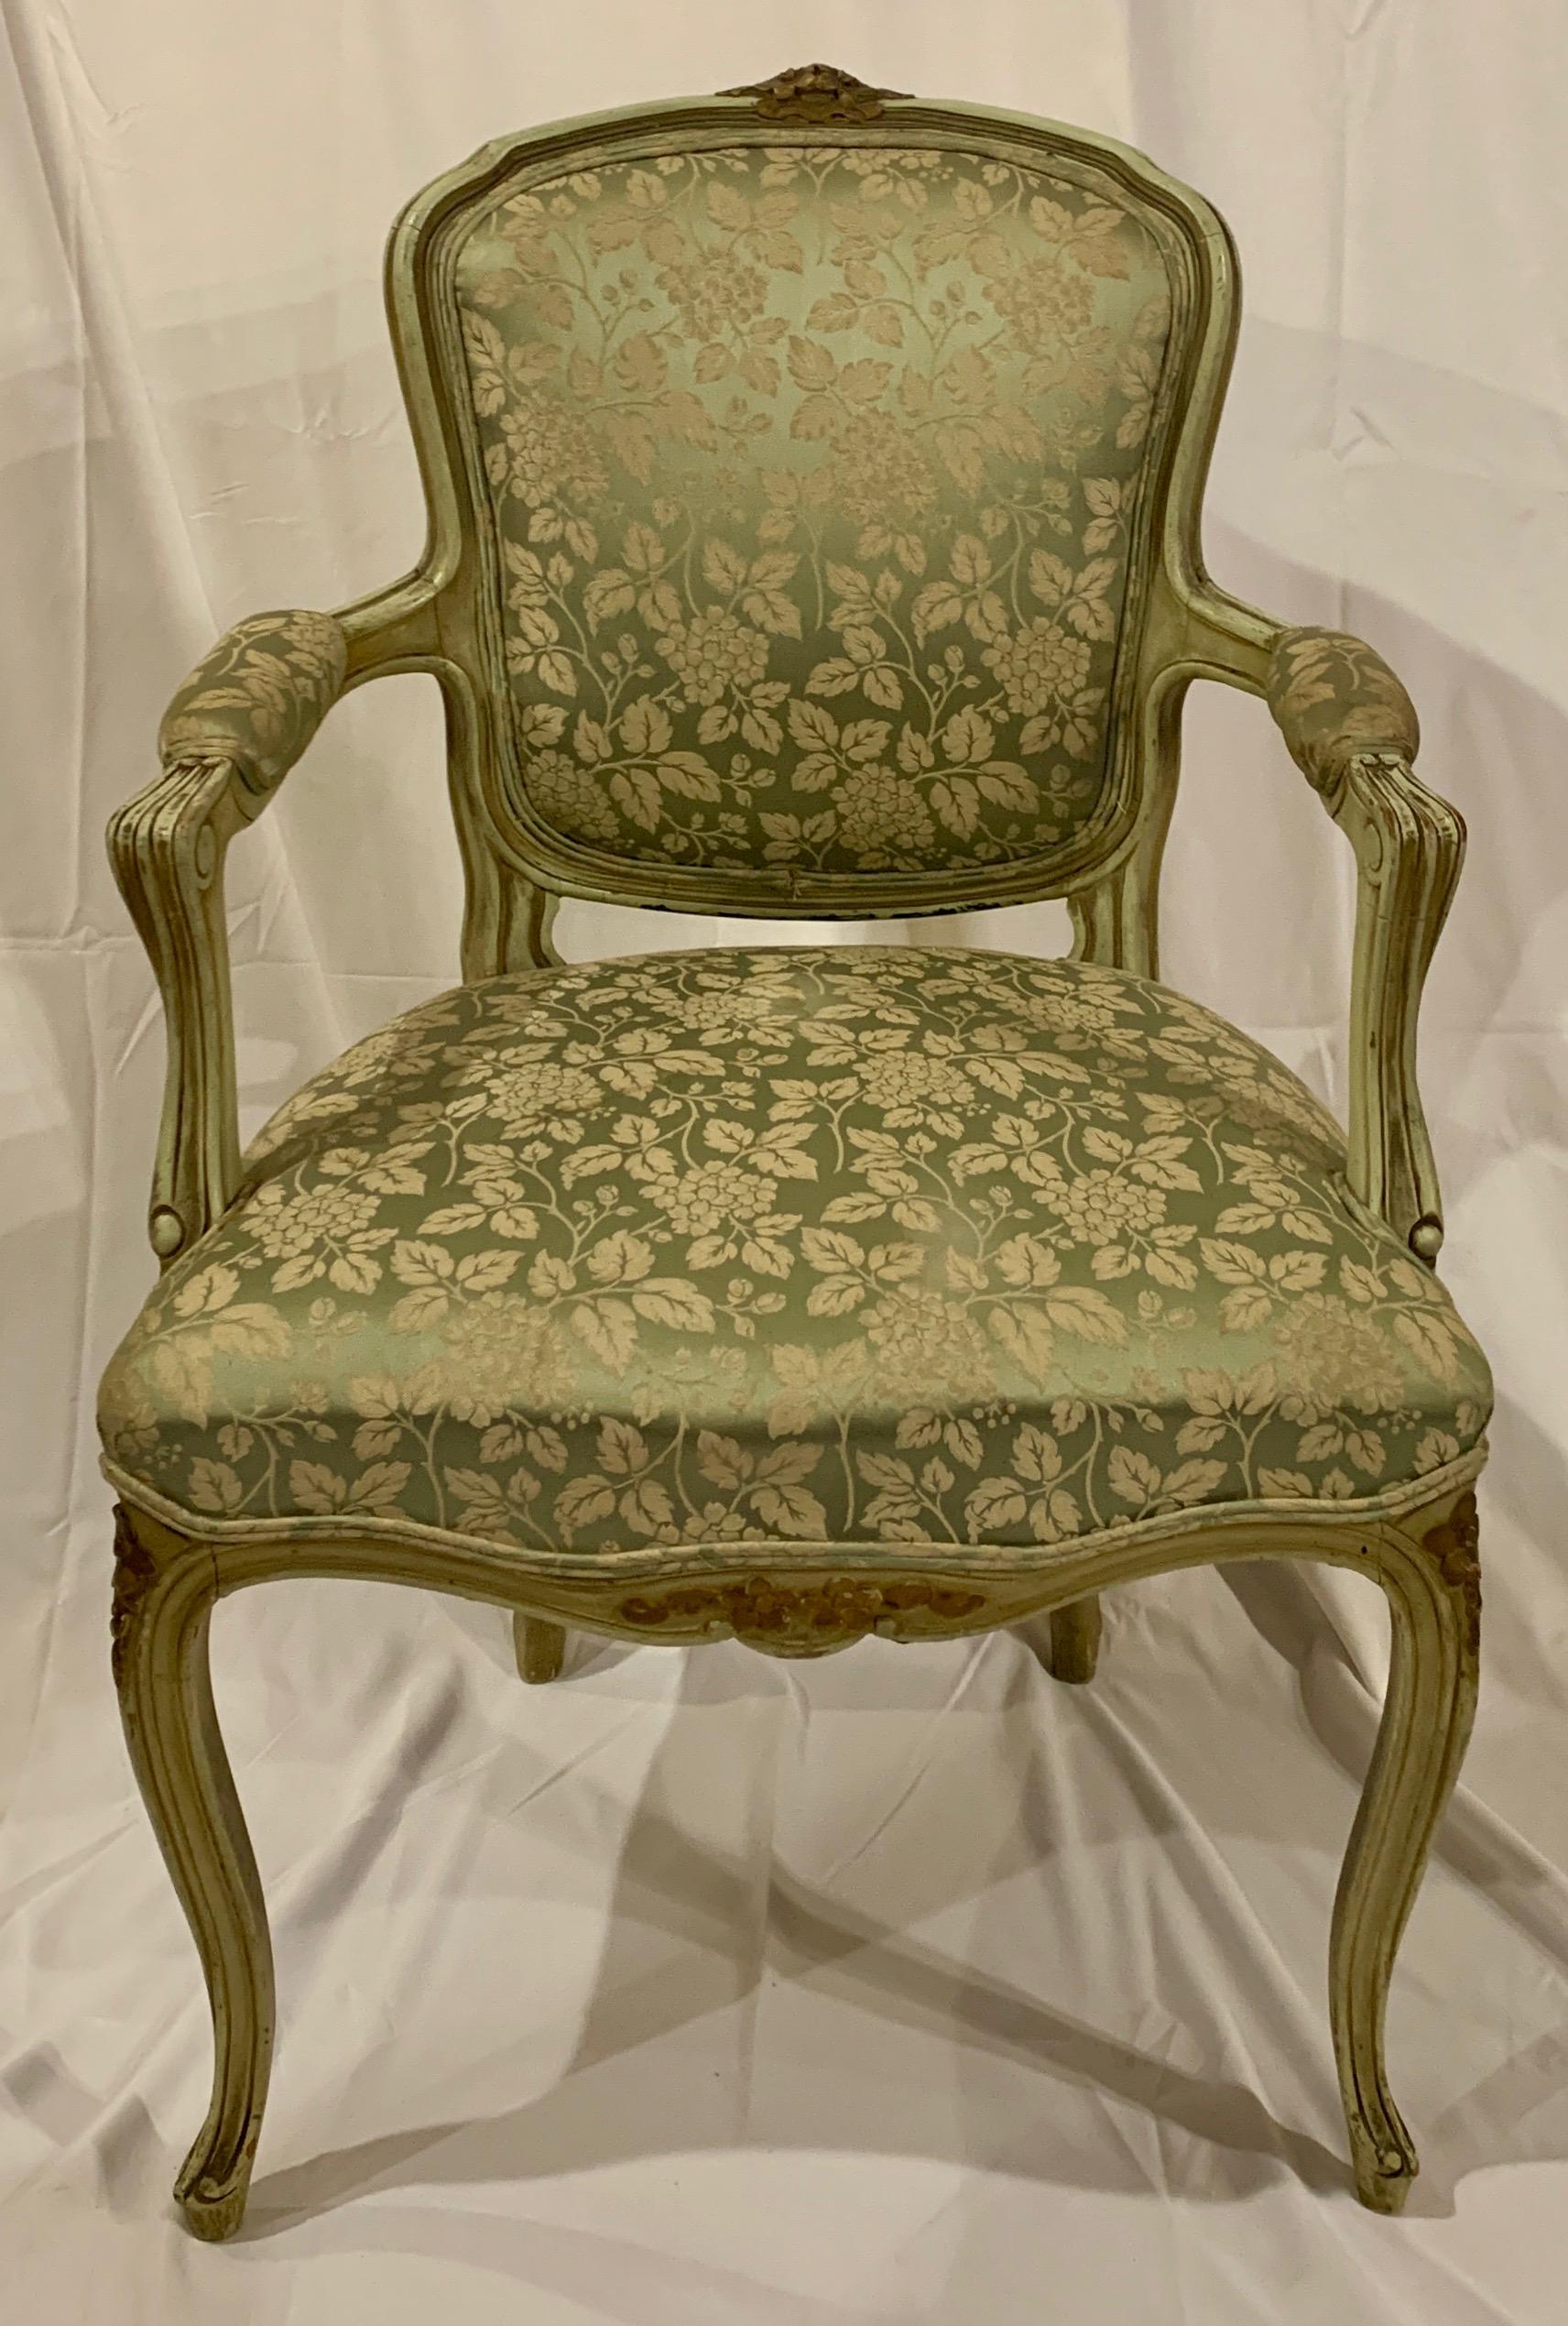 This set of painted armchairs would work well in a traditional or more contemporary setting.  
